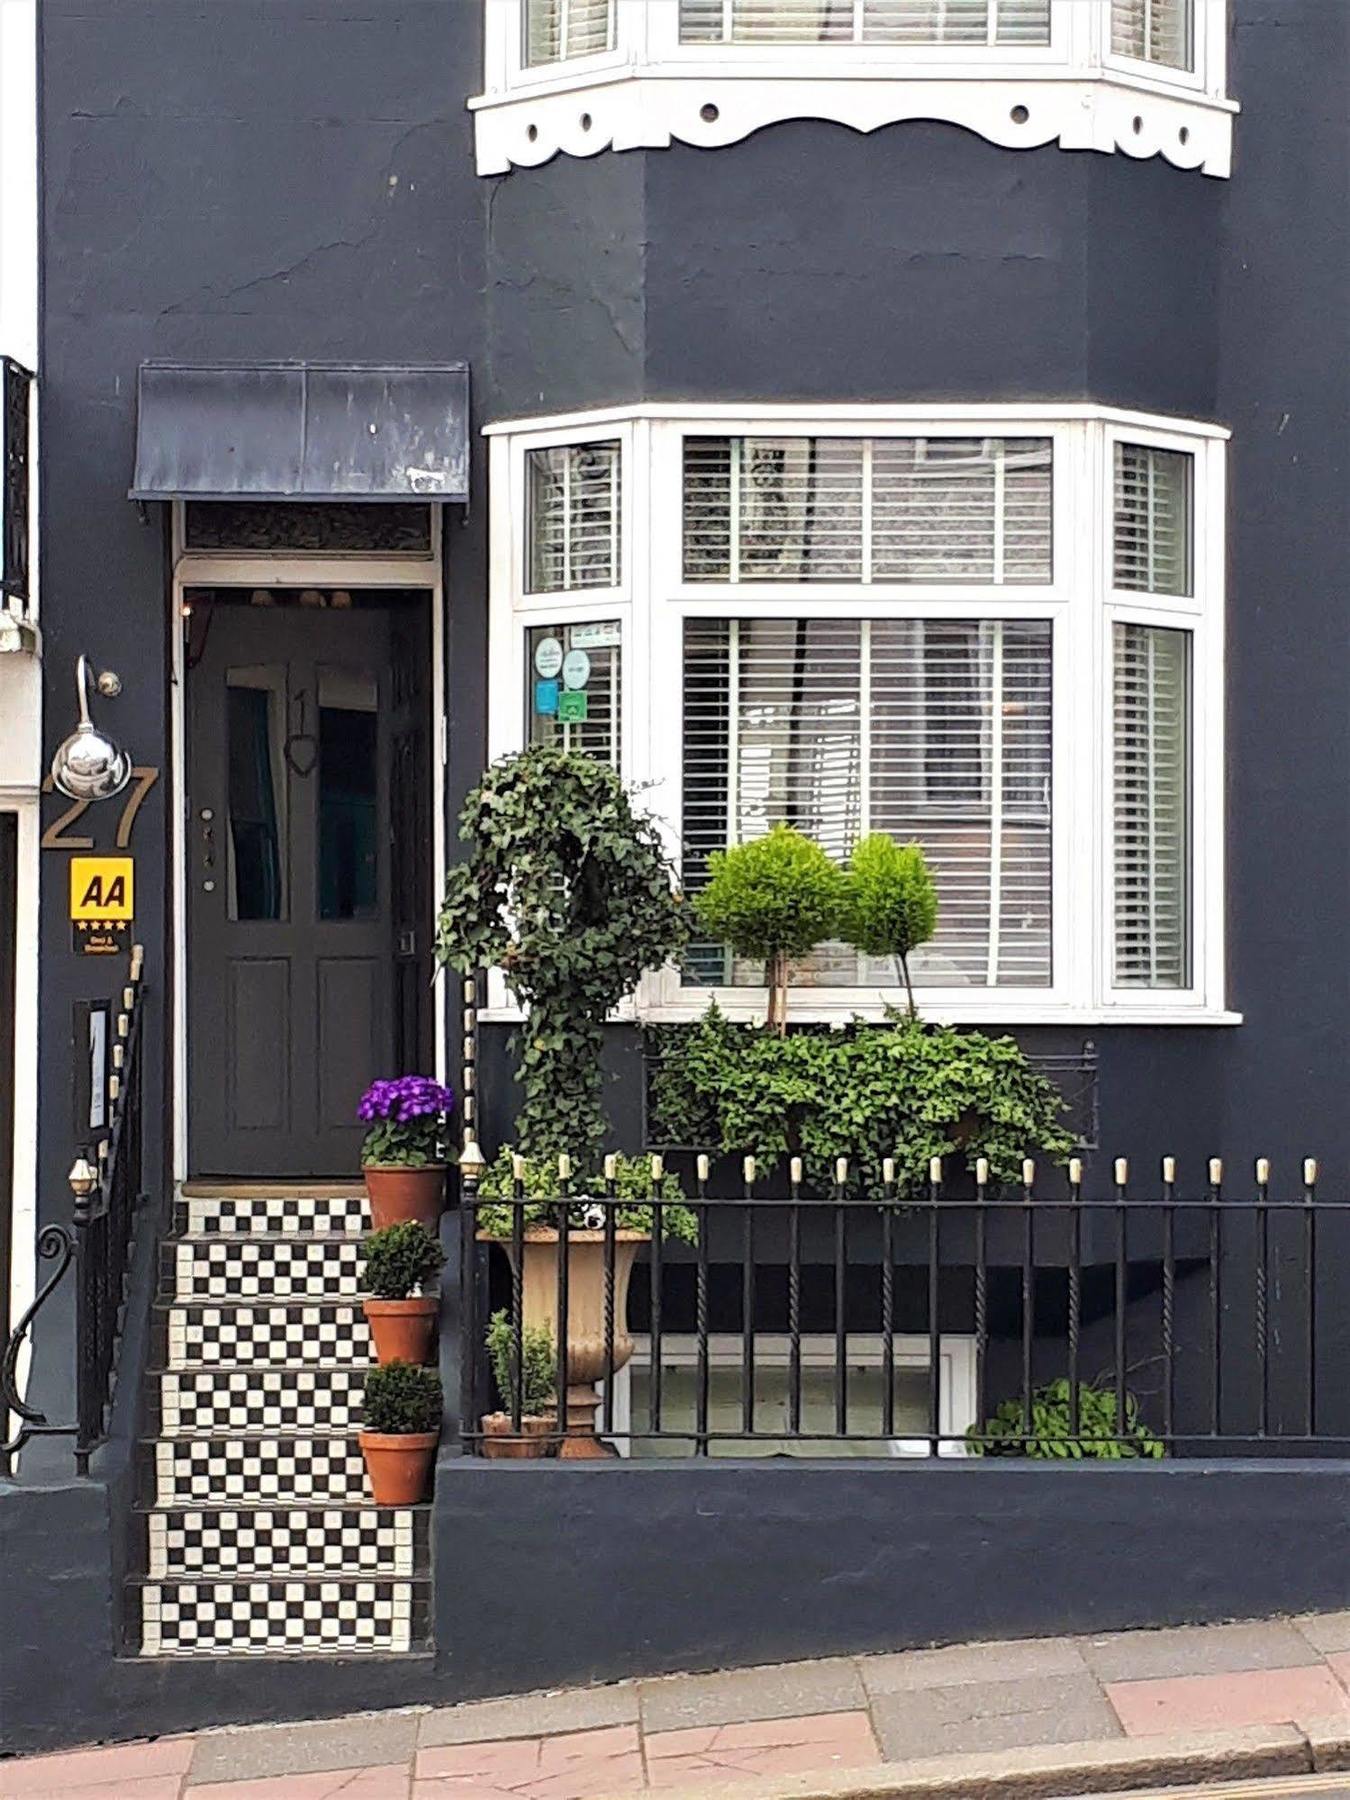 27 Brighton Guesthouse 외부 사진